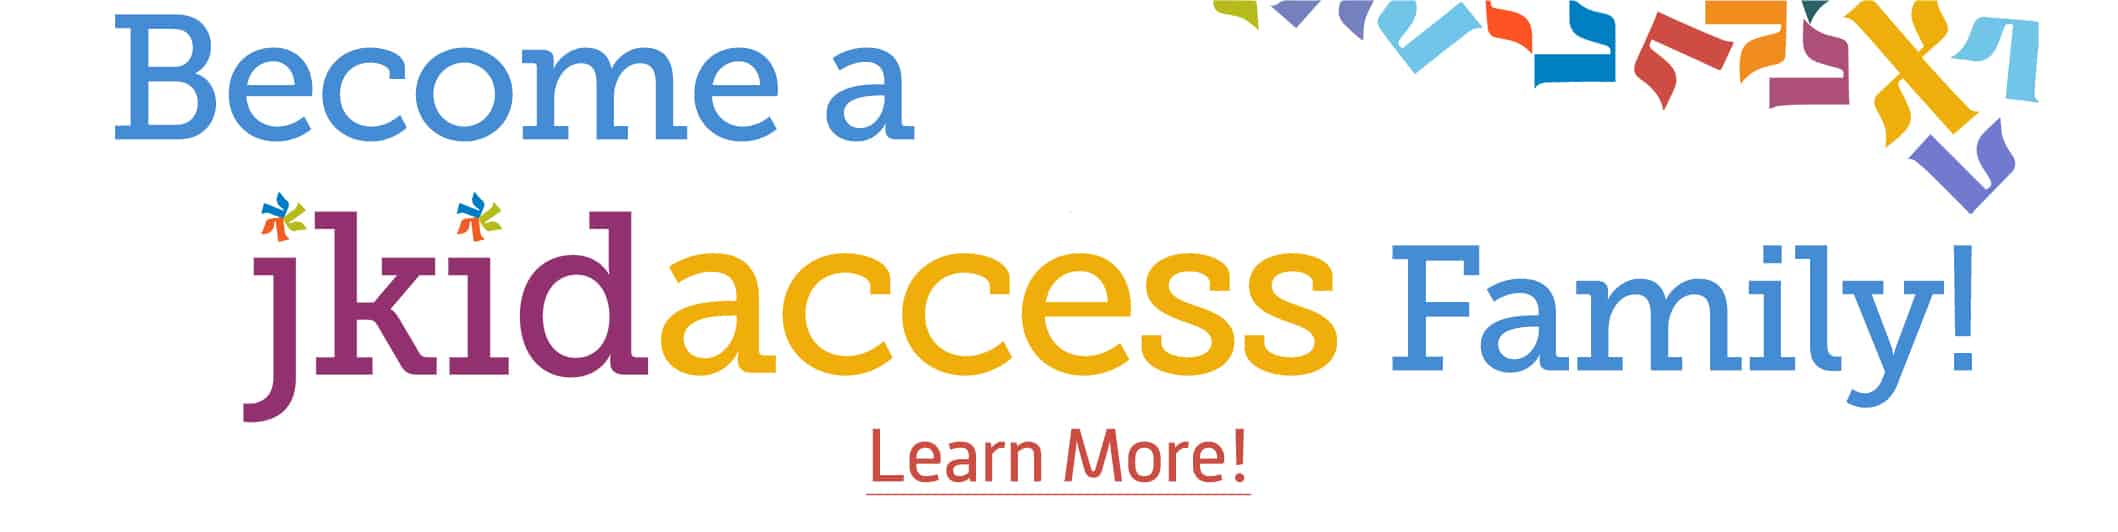 Become a jkidaccess family! Click the image to learn more.